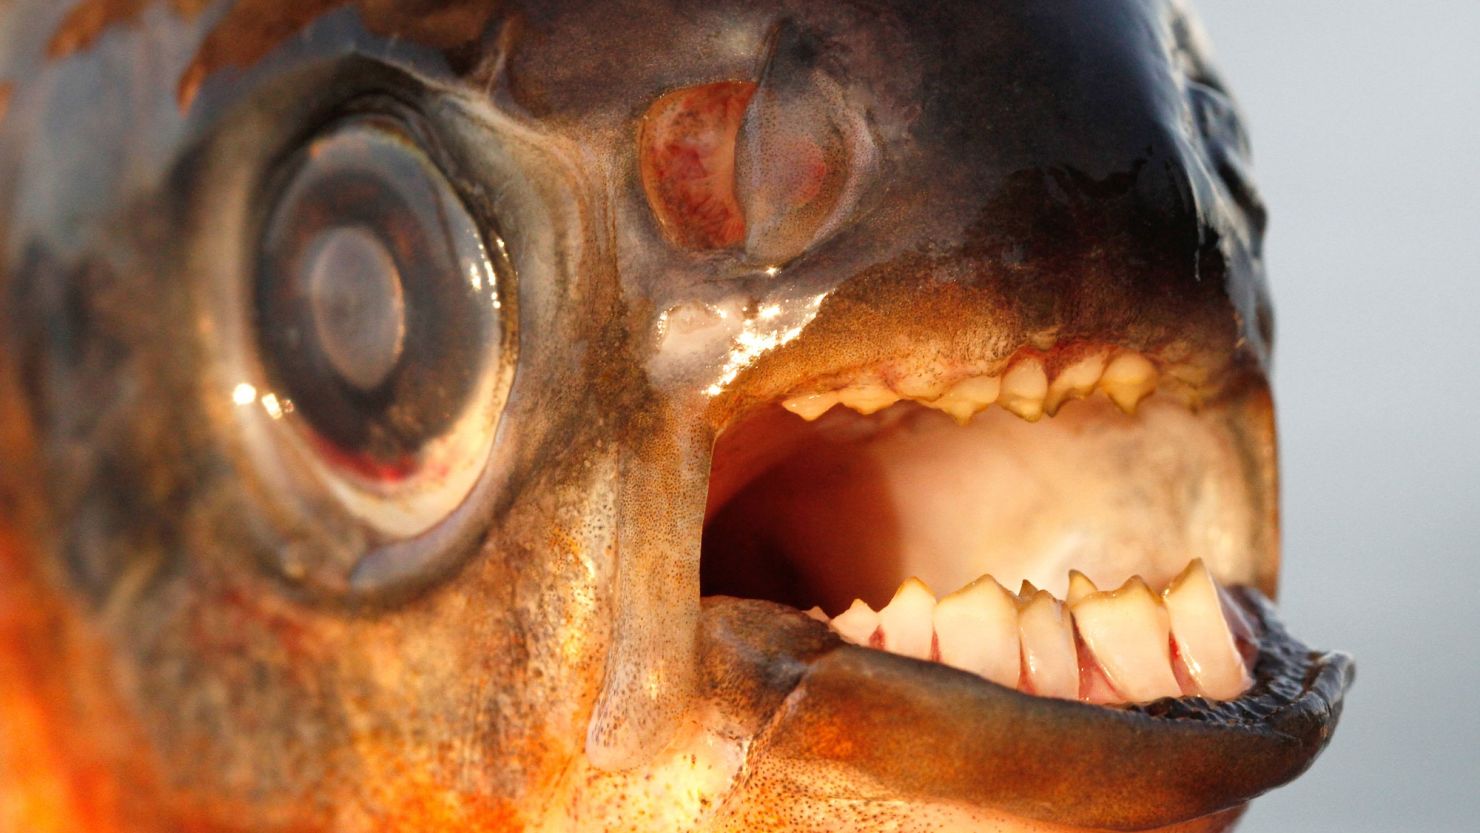 Warning over testicle-biting fish in Denmark? It's all wet